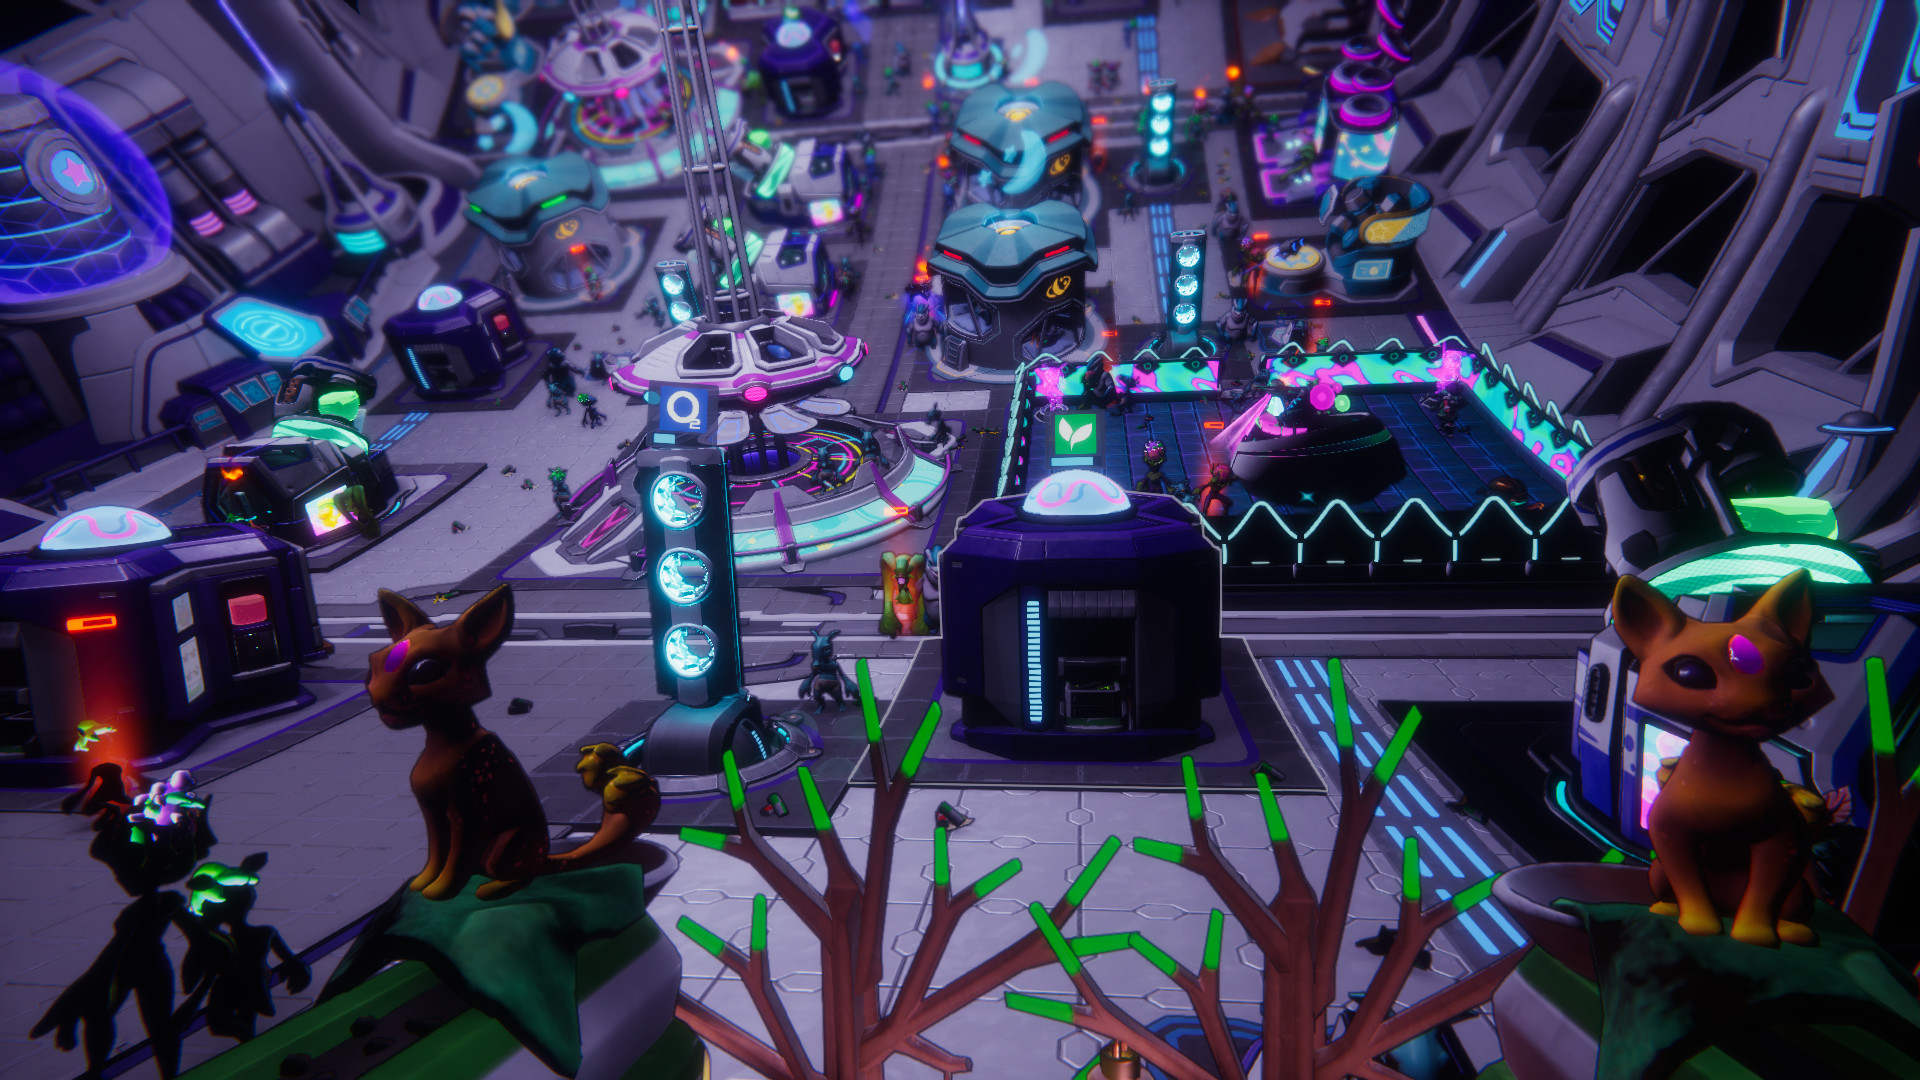 Run a space station in Spacebase Startopia, coming October 23